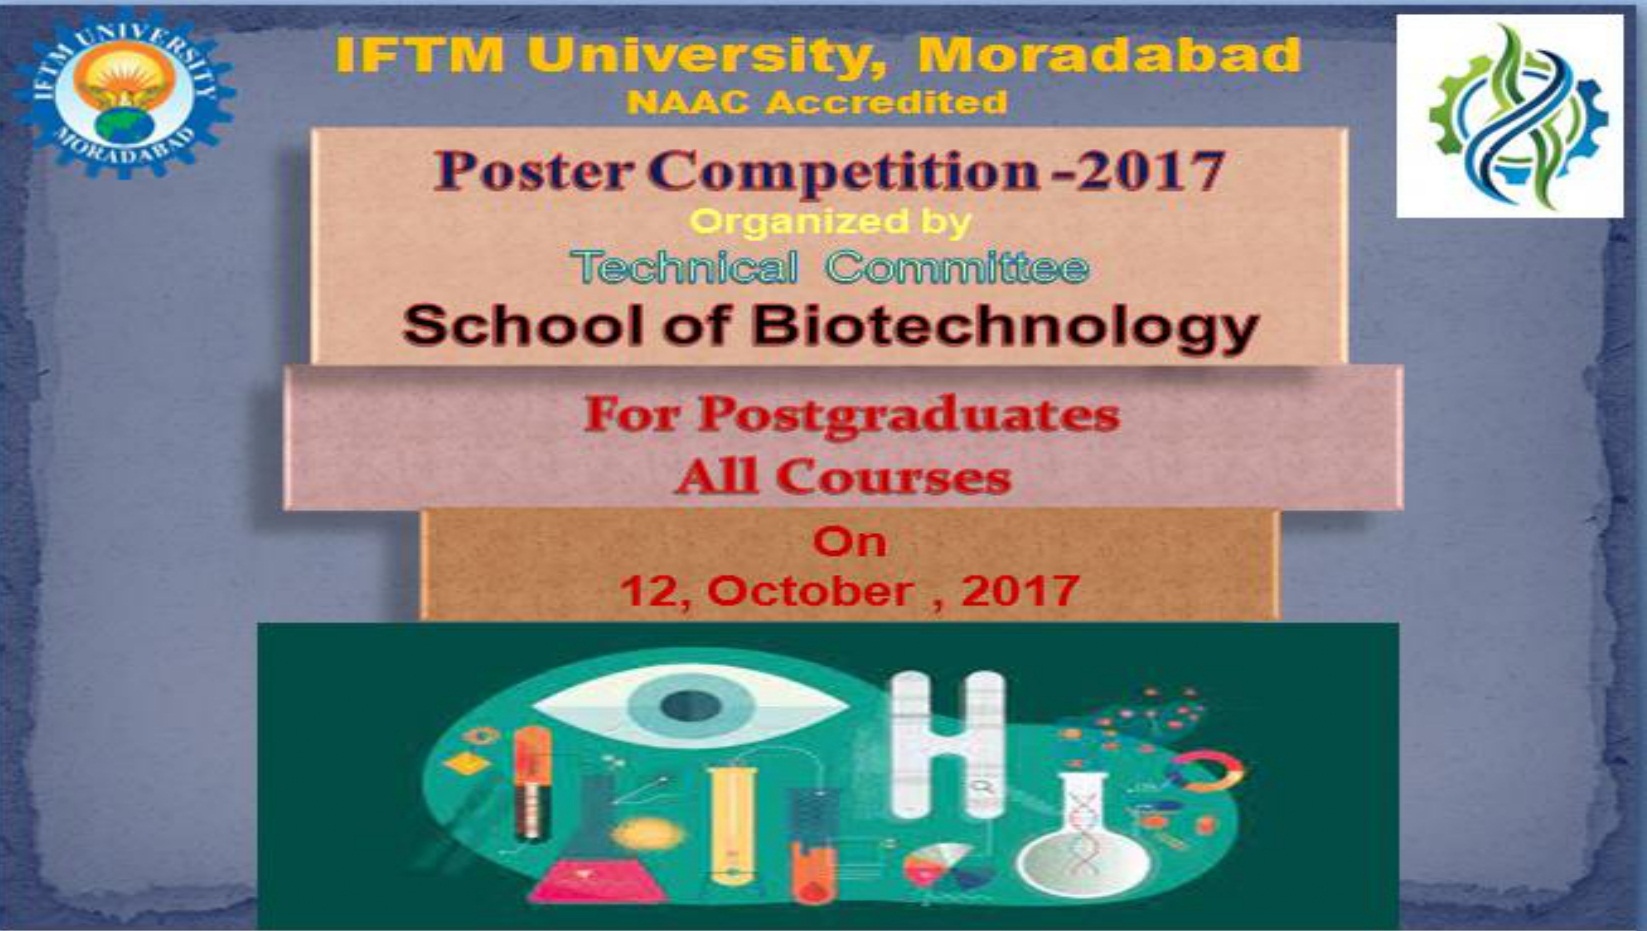 Poster Competition-2017